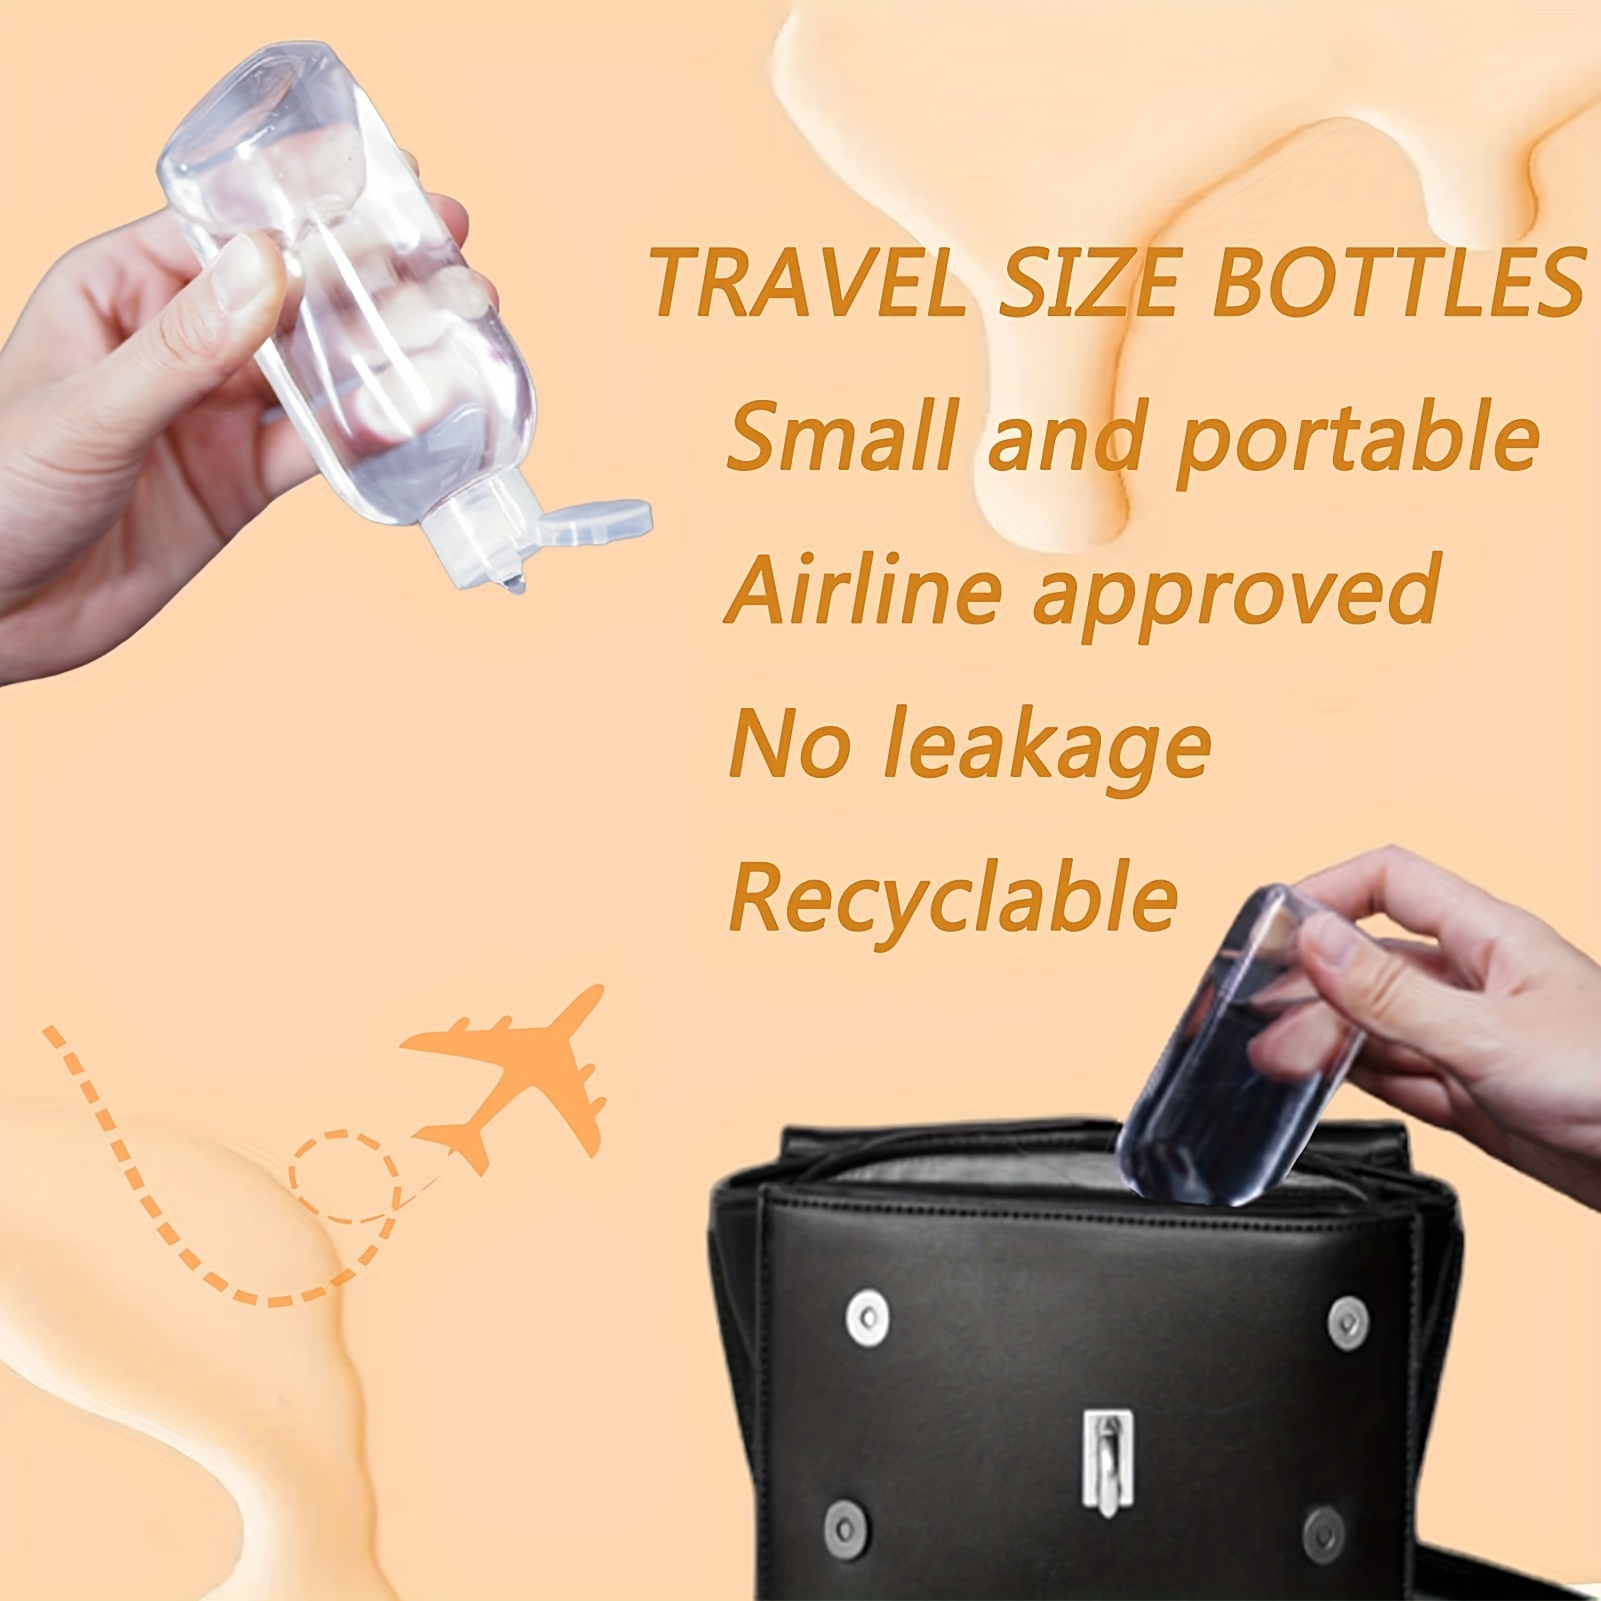 Wholesale Travel Size Plastic Squeeze Plastic Milk Bottles With Flip Lid  30ml And 50ml Sizes For Liquids, Makeup, Toiletries, And Cosmetics From  Prettycase, $0.48